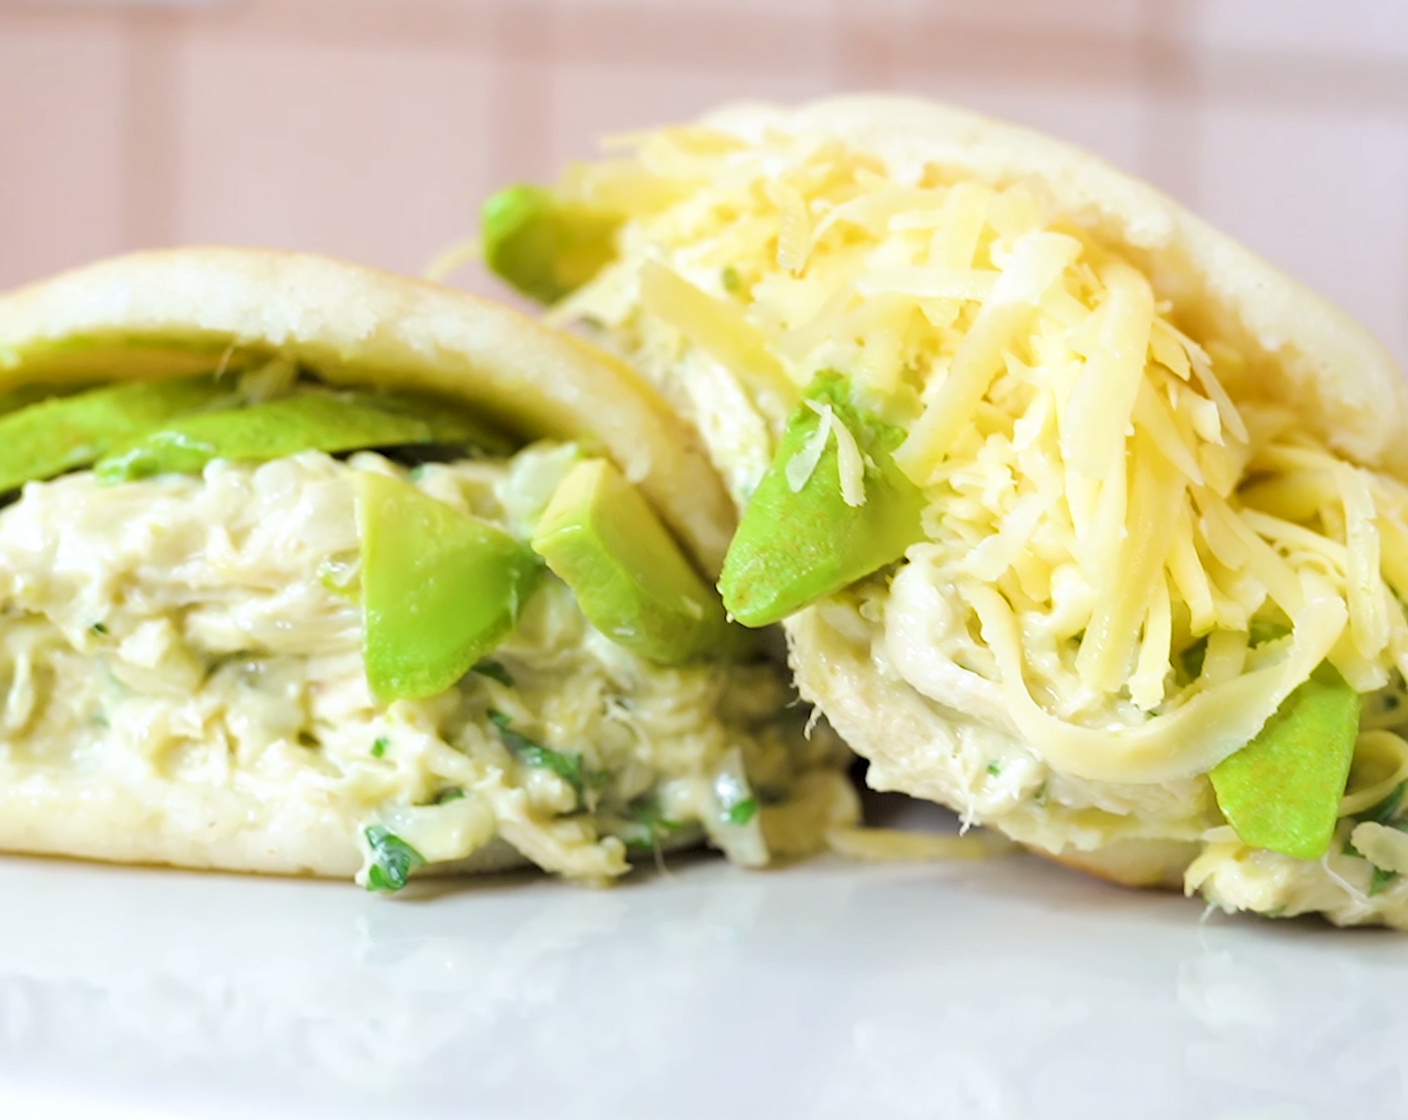 step 11 To make the Reina Pepiada, stuff your open arepa with the mixture and top with avocado slices. To make the Arepa Sifrina, add Shredded Gouda Cheese (1 cup) on top of the avocado slices.